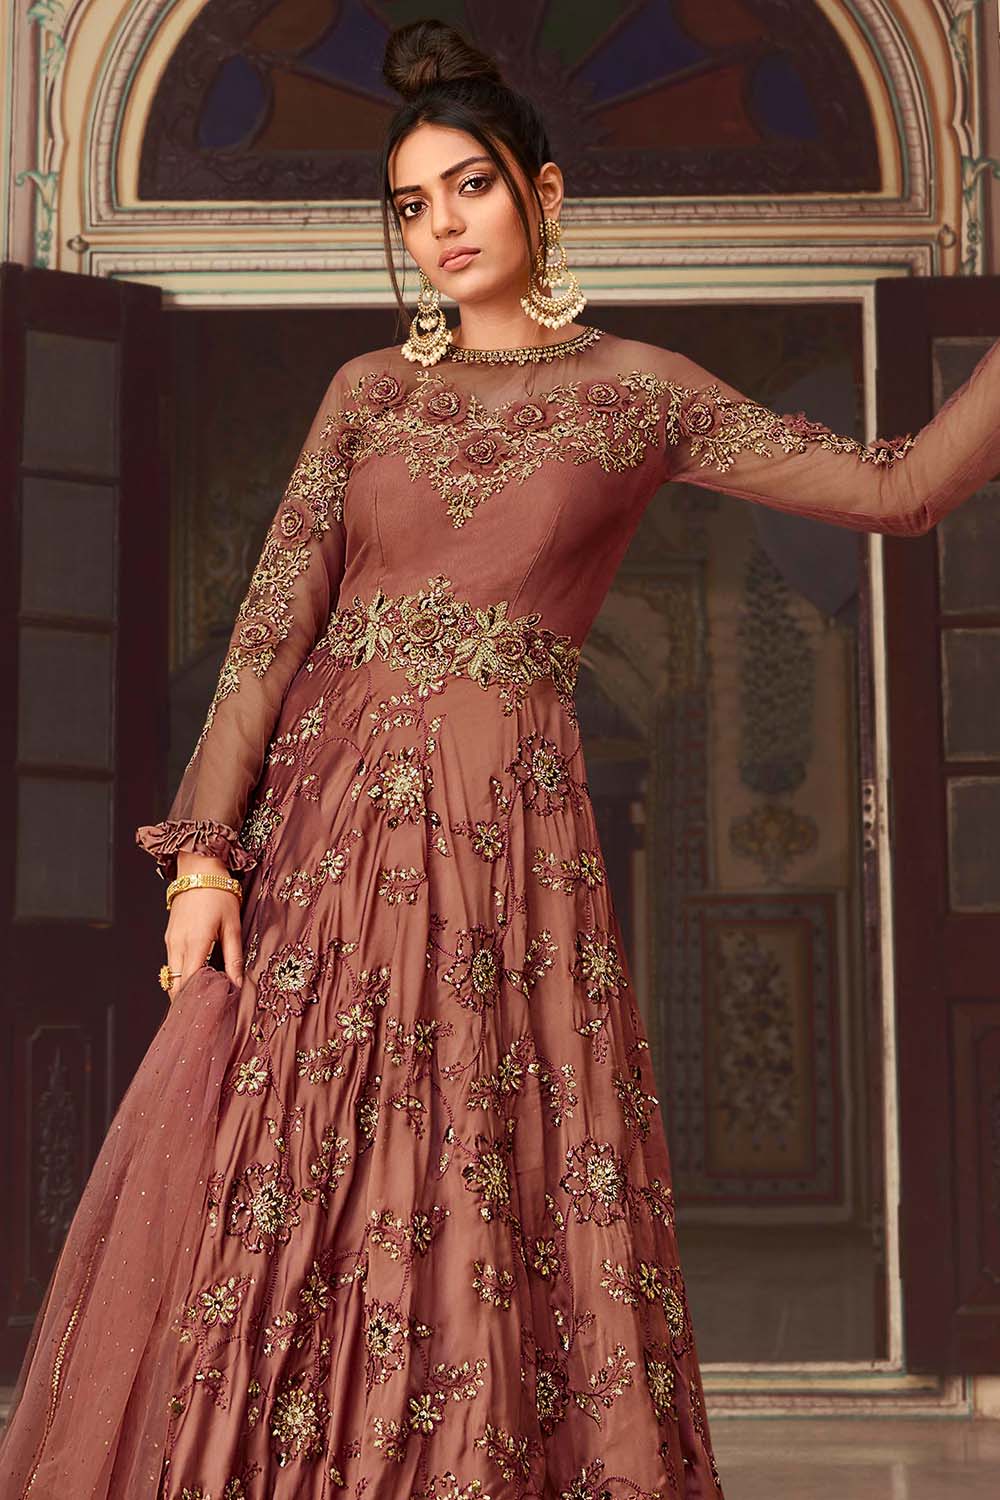 Discover the Beauty of Anarkali Suit Designs | Readiprint Fashions Blog